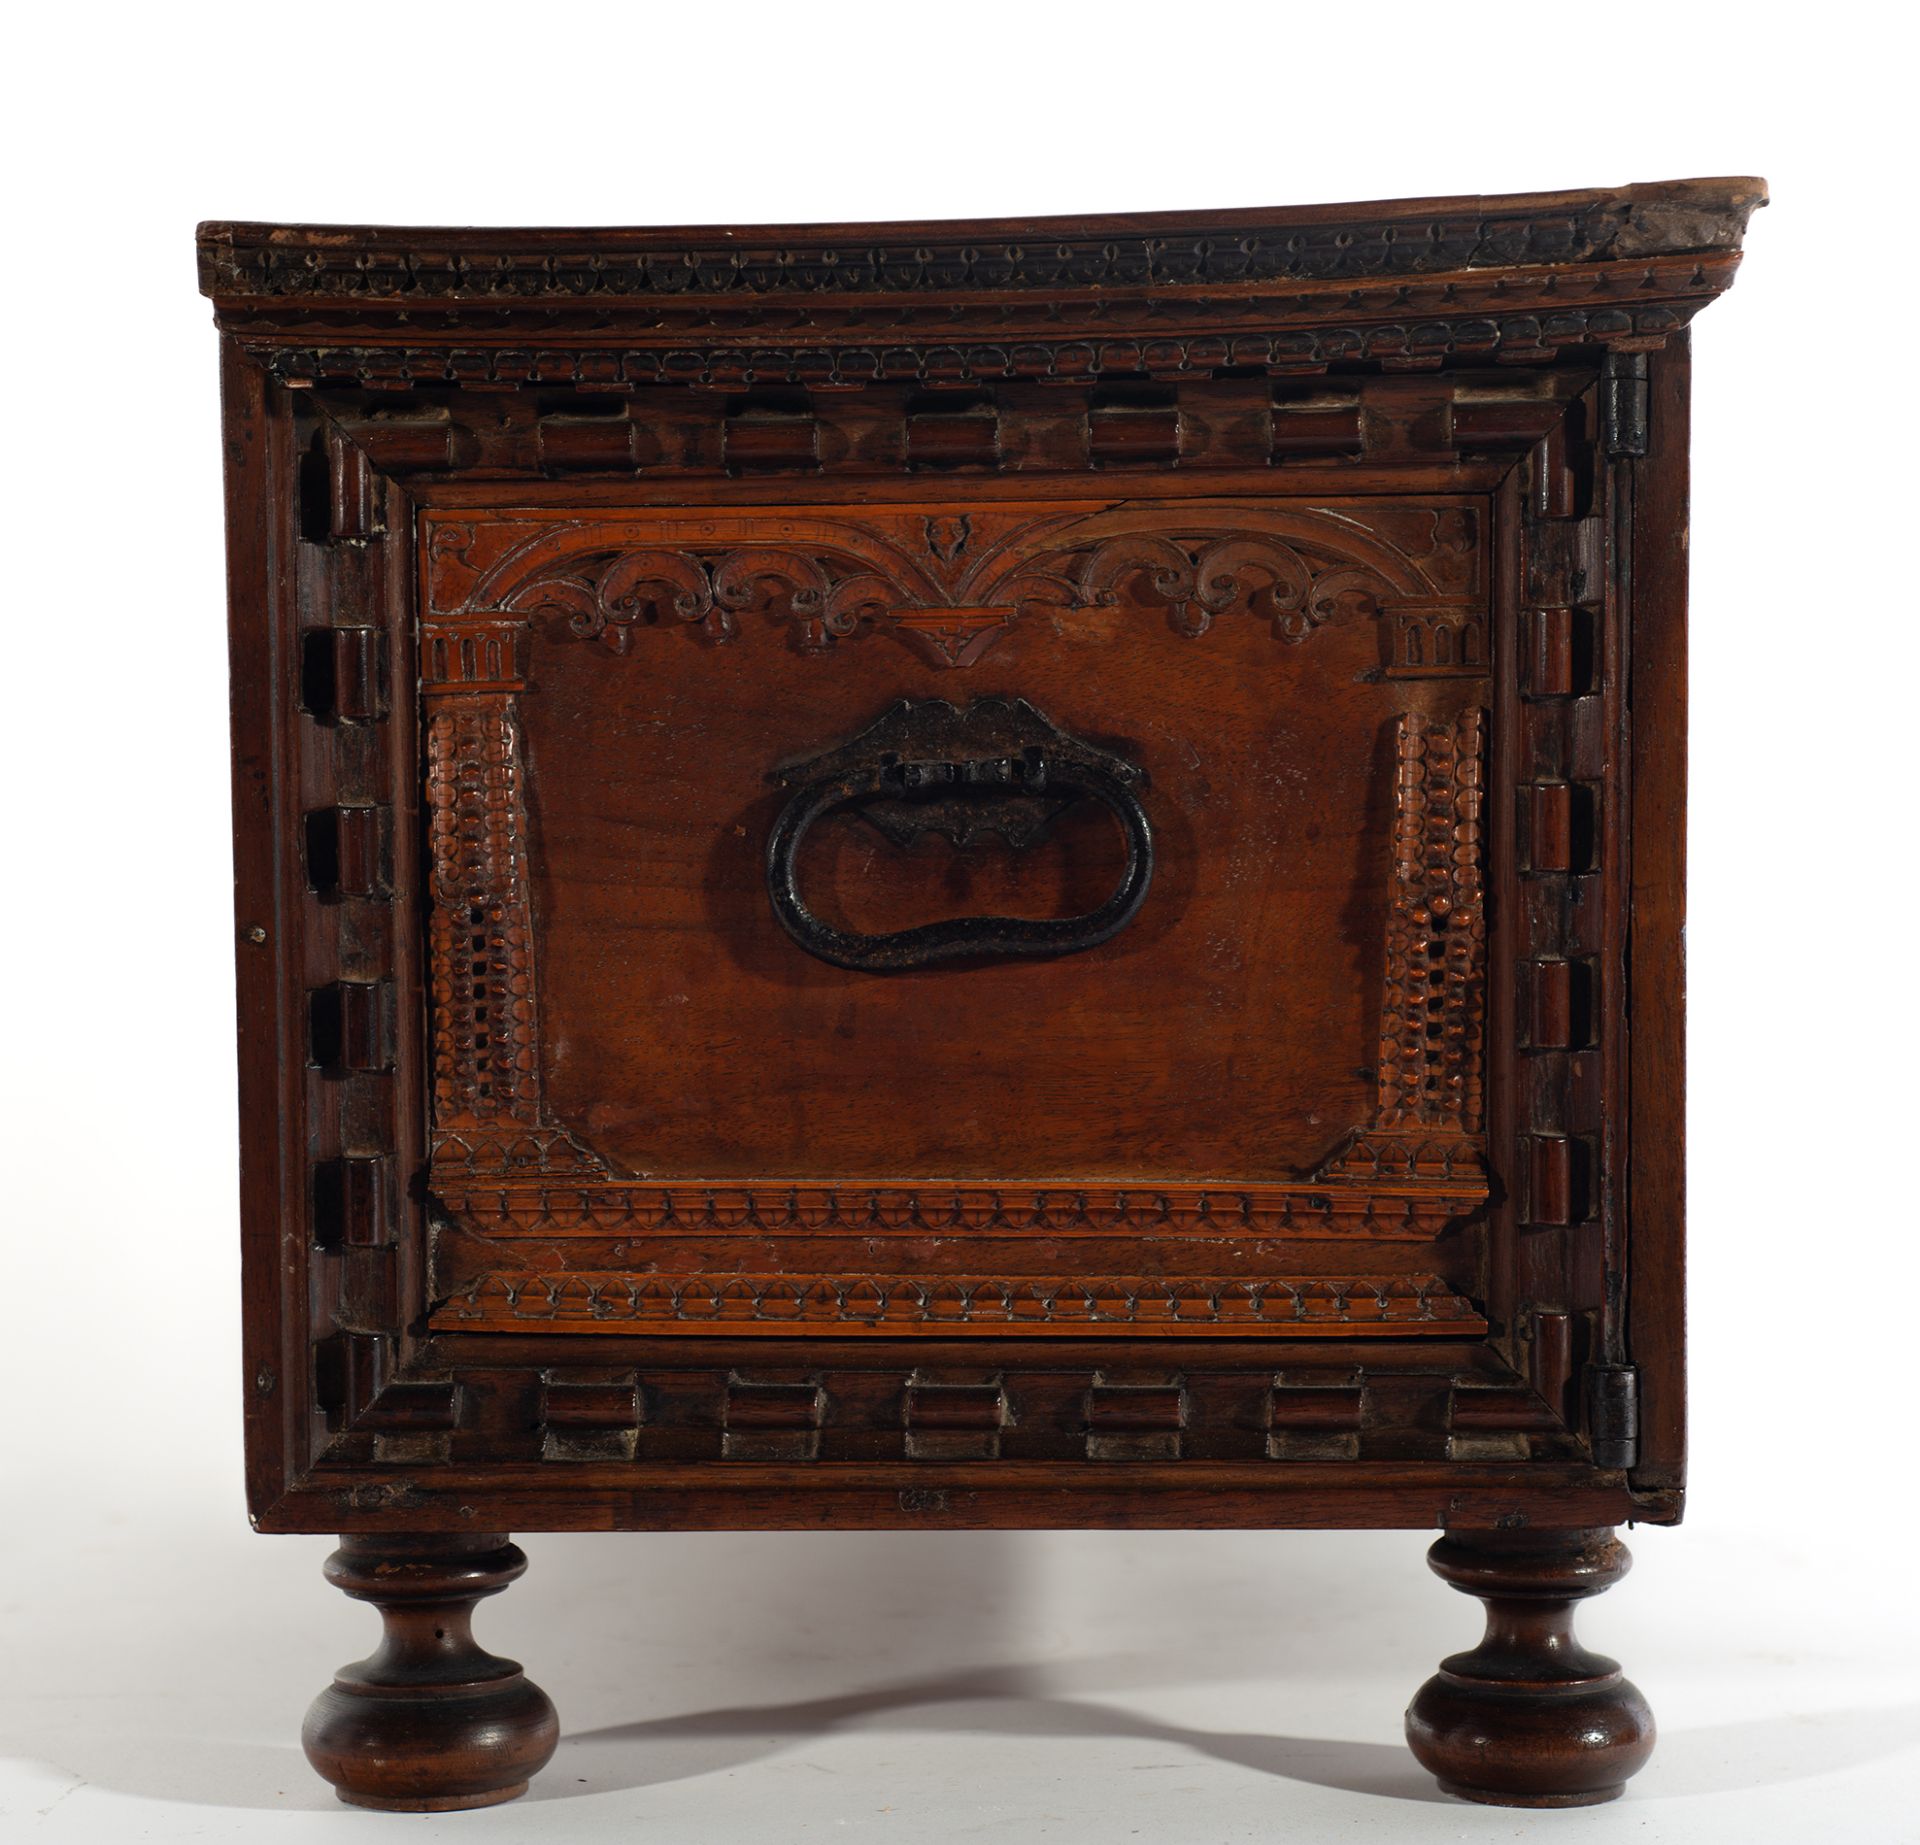 Exceptional plateresque chest in fruit wood, boxwood and marquetry, Spanish Renaissance, mid-16th ce - Image 3 of 13